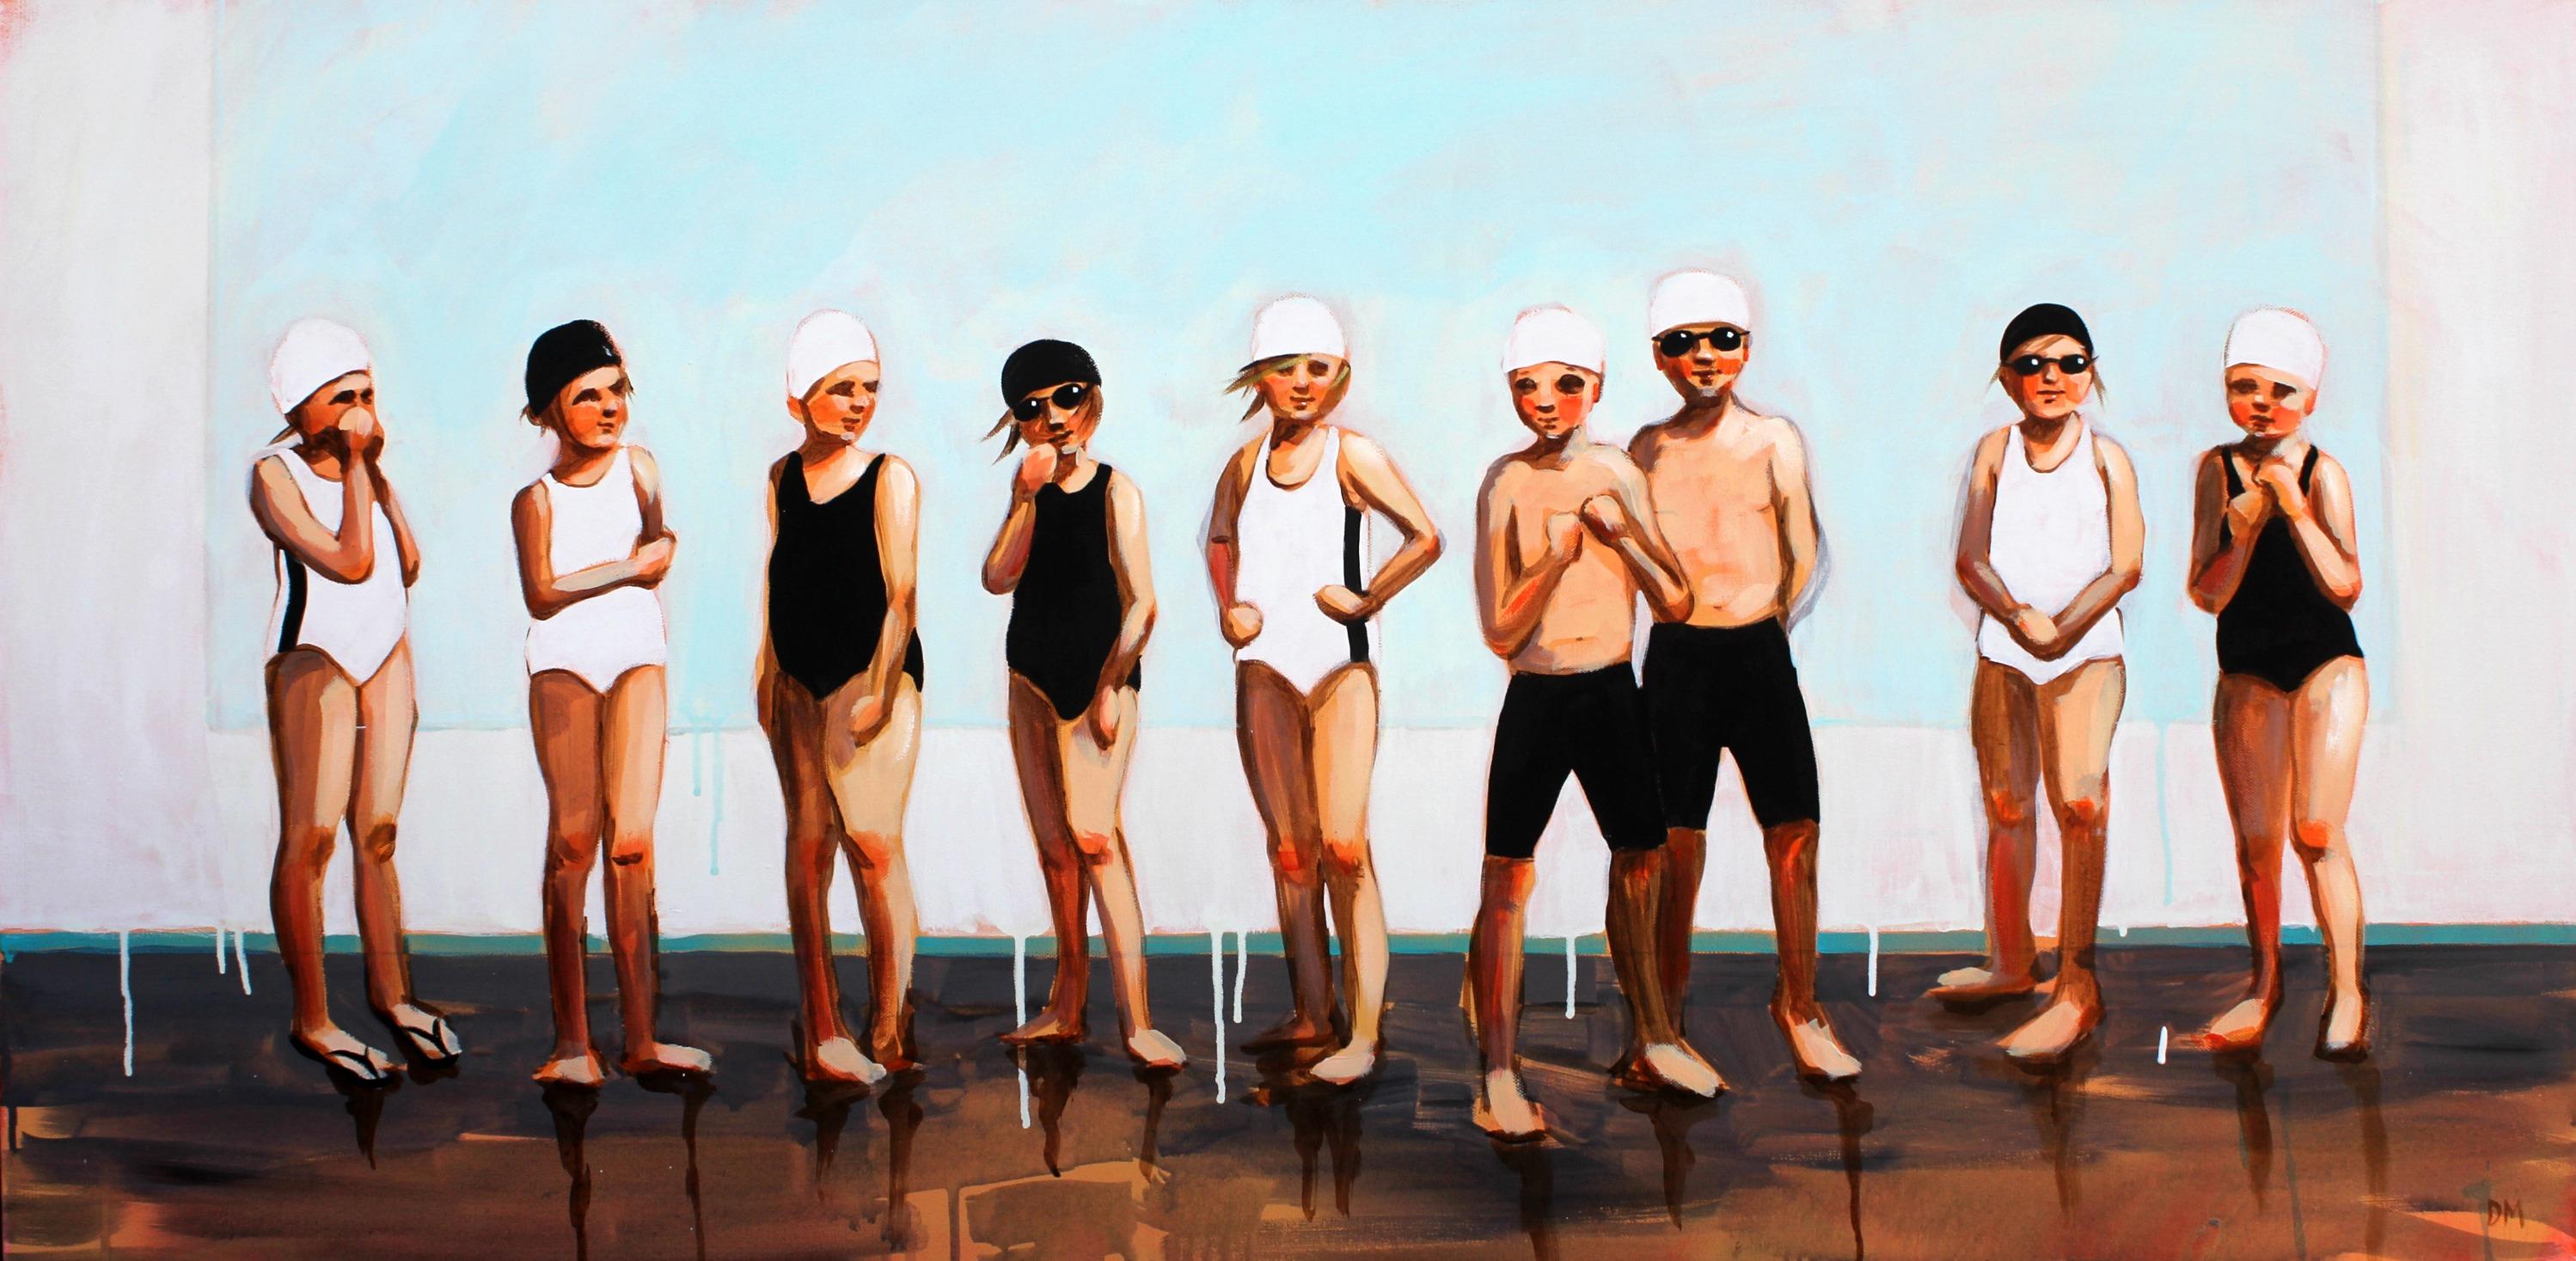 Debbie Miller Figurative Painting - "Lined Up" oil painting of boys and girls in black and white swimsuits, caps